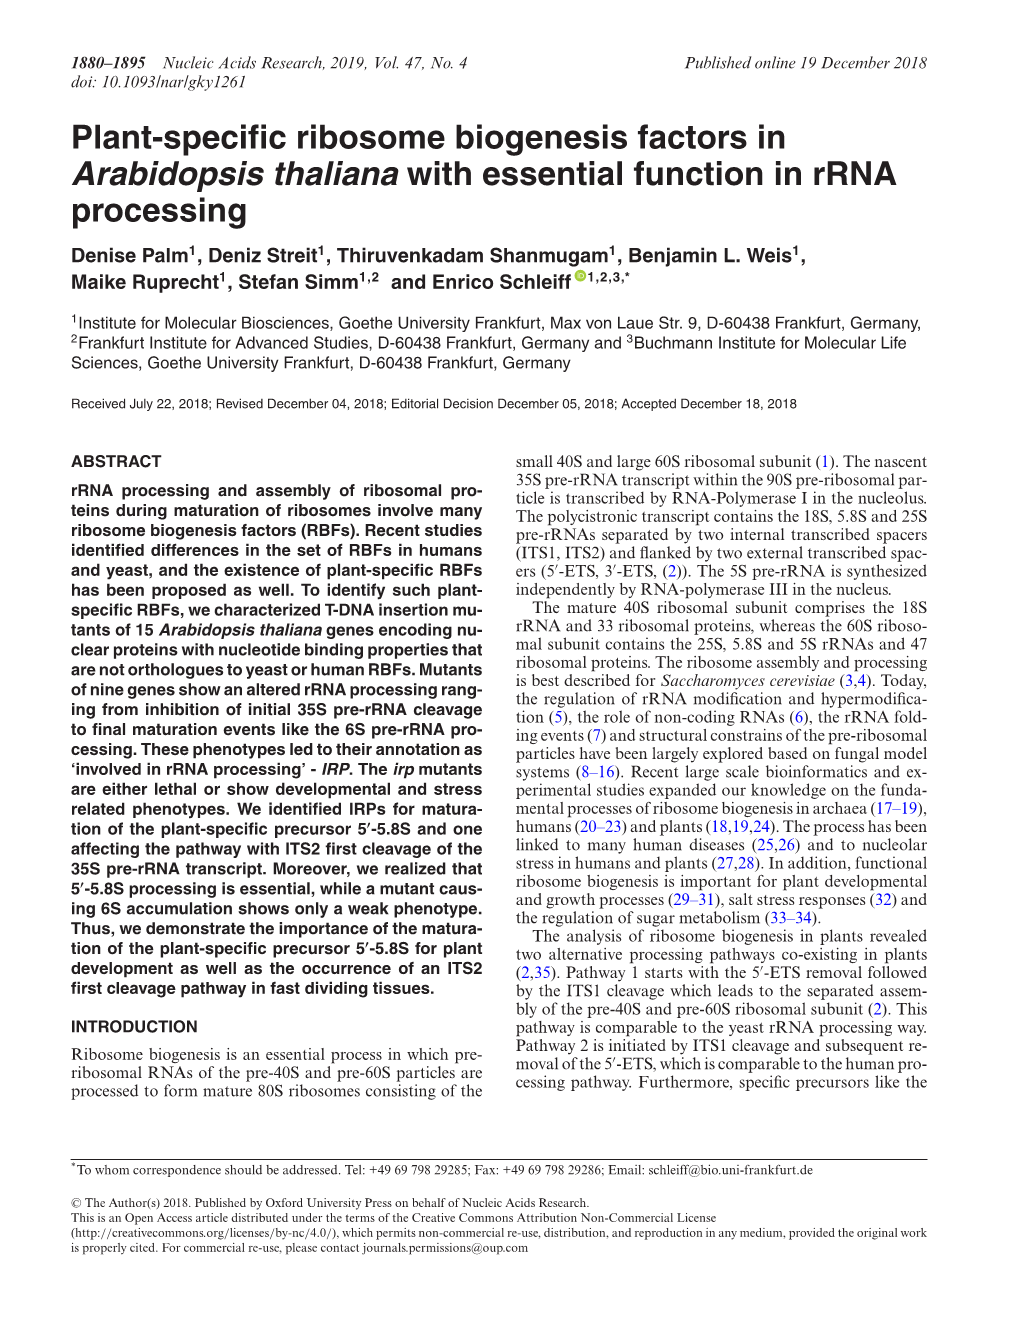 Plant-Specific Ribosome Biogenesis Factors in Arabidopsis Thaliana with Essential Function in Rrna Processing